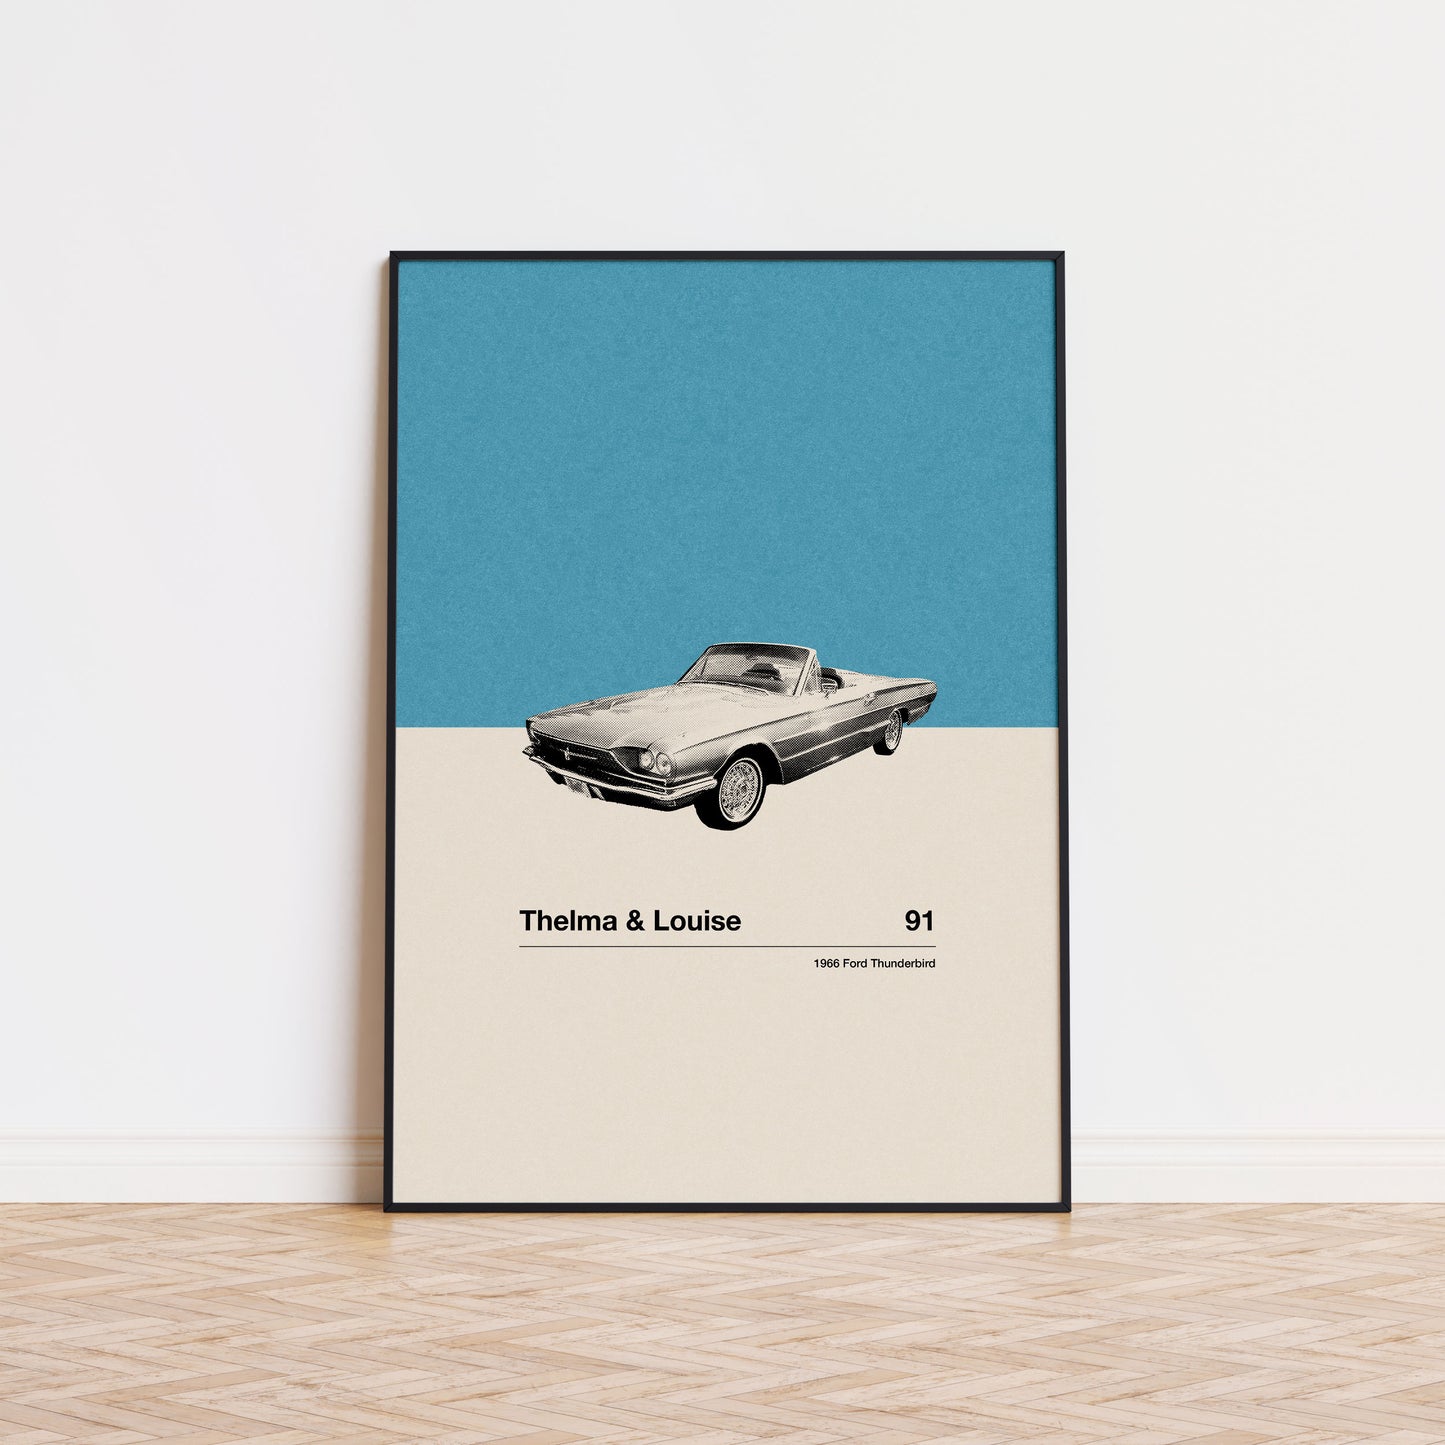 Thelma & Louise Inspire Poster | Car in Movie Poster | Mid Century Modern Poster | Minimalist Poster | Retro Art Print | Classic Movie